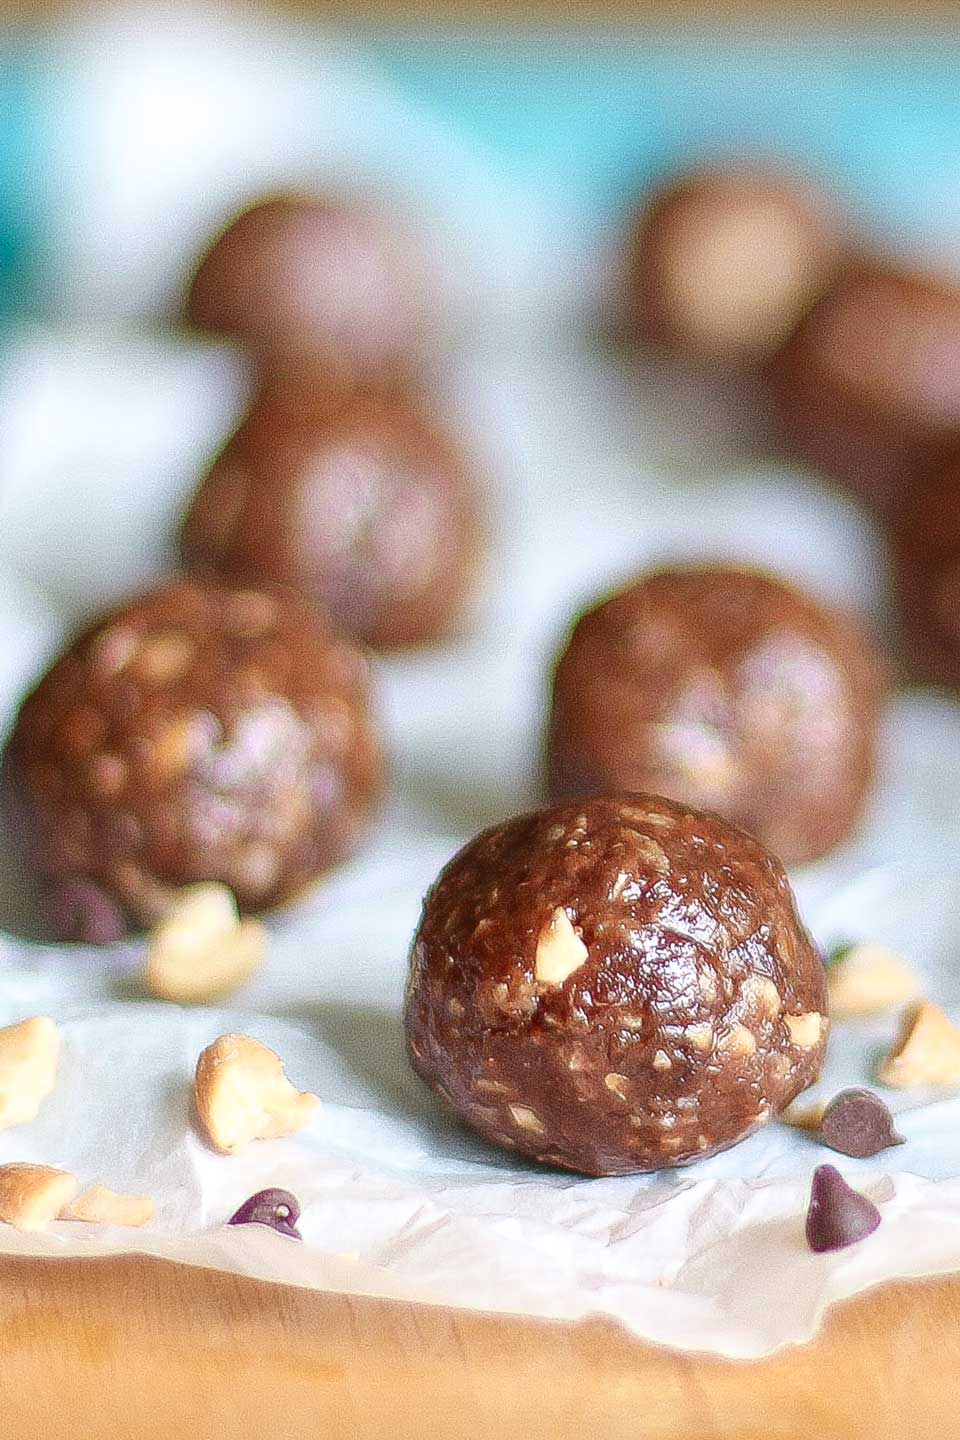 One chocolate peanut butter energy ball with several others out of focus nearby.